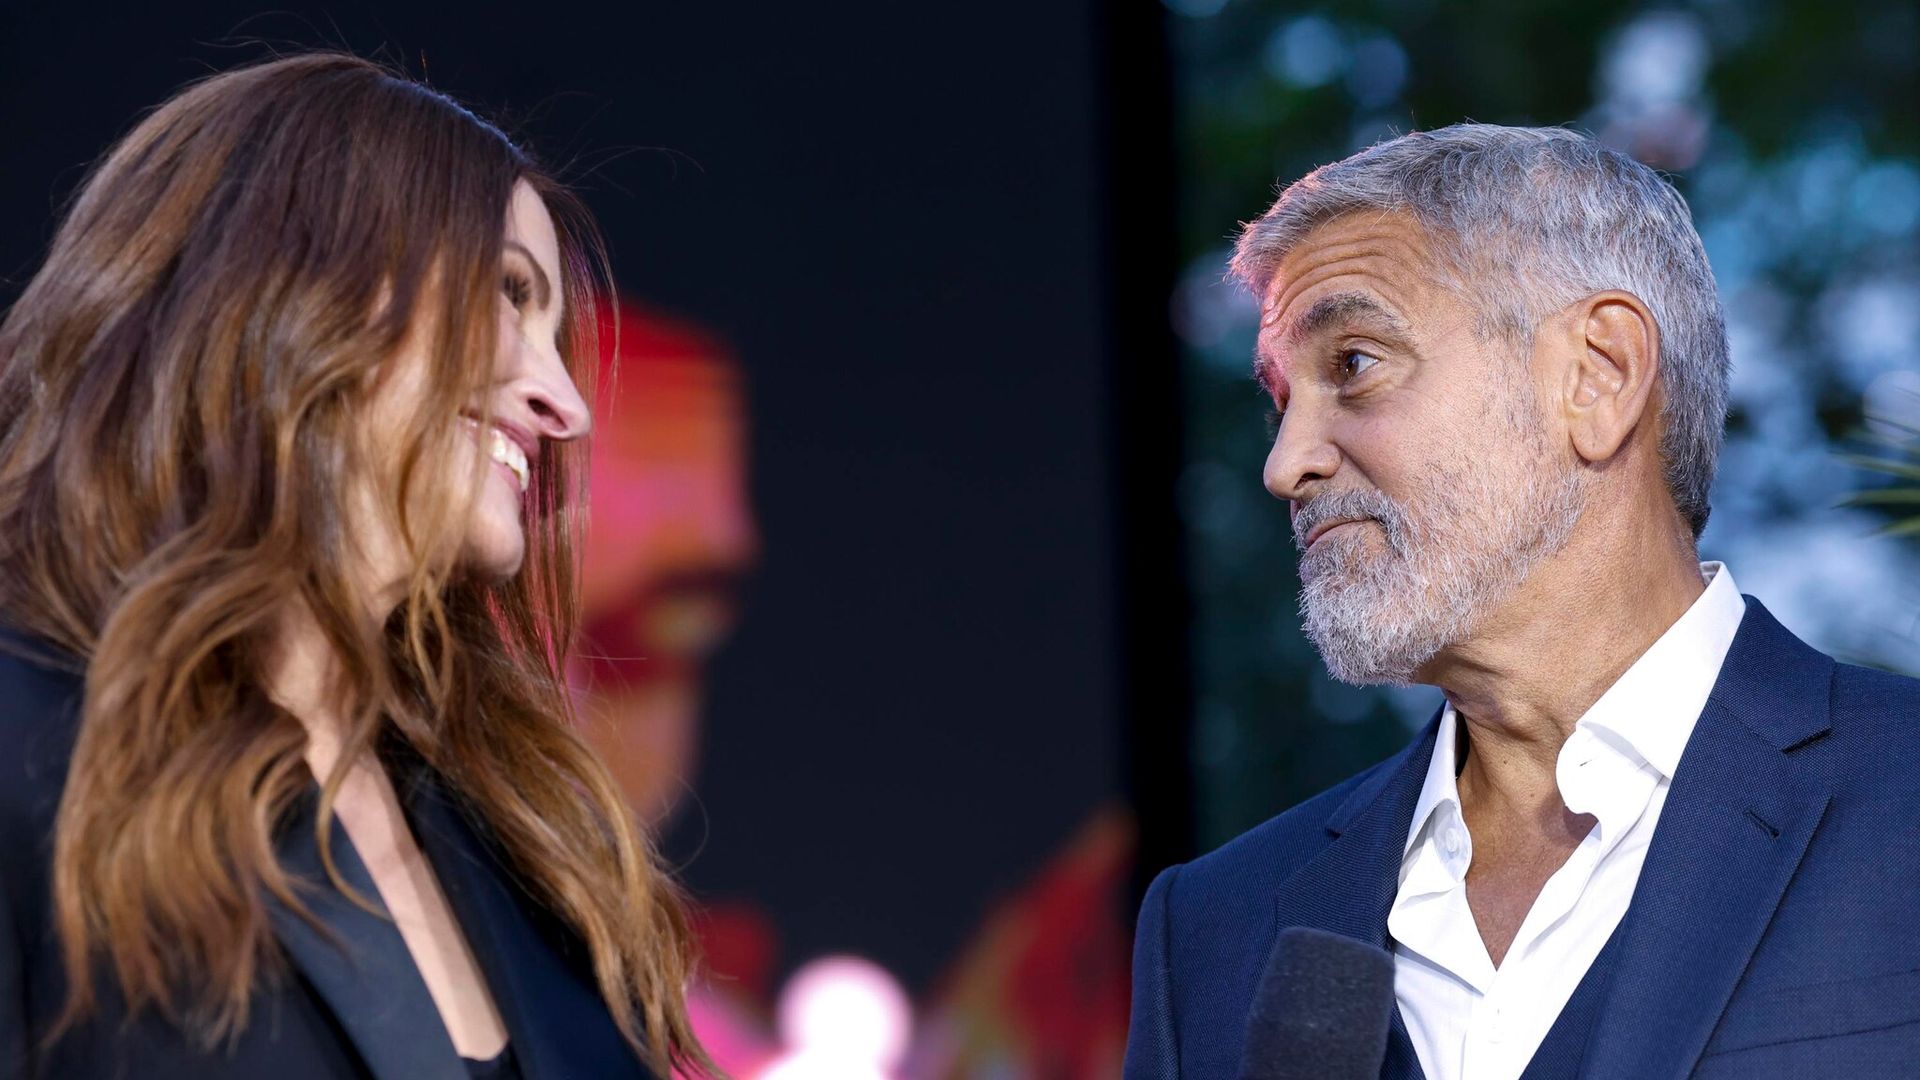 julia roberts and george clooney attend the world premiere of quot ticket to paradise